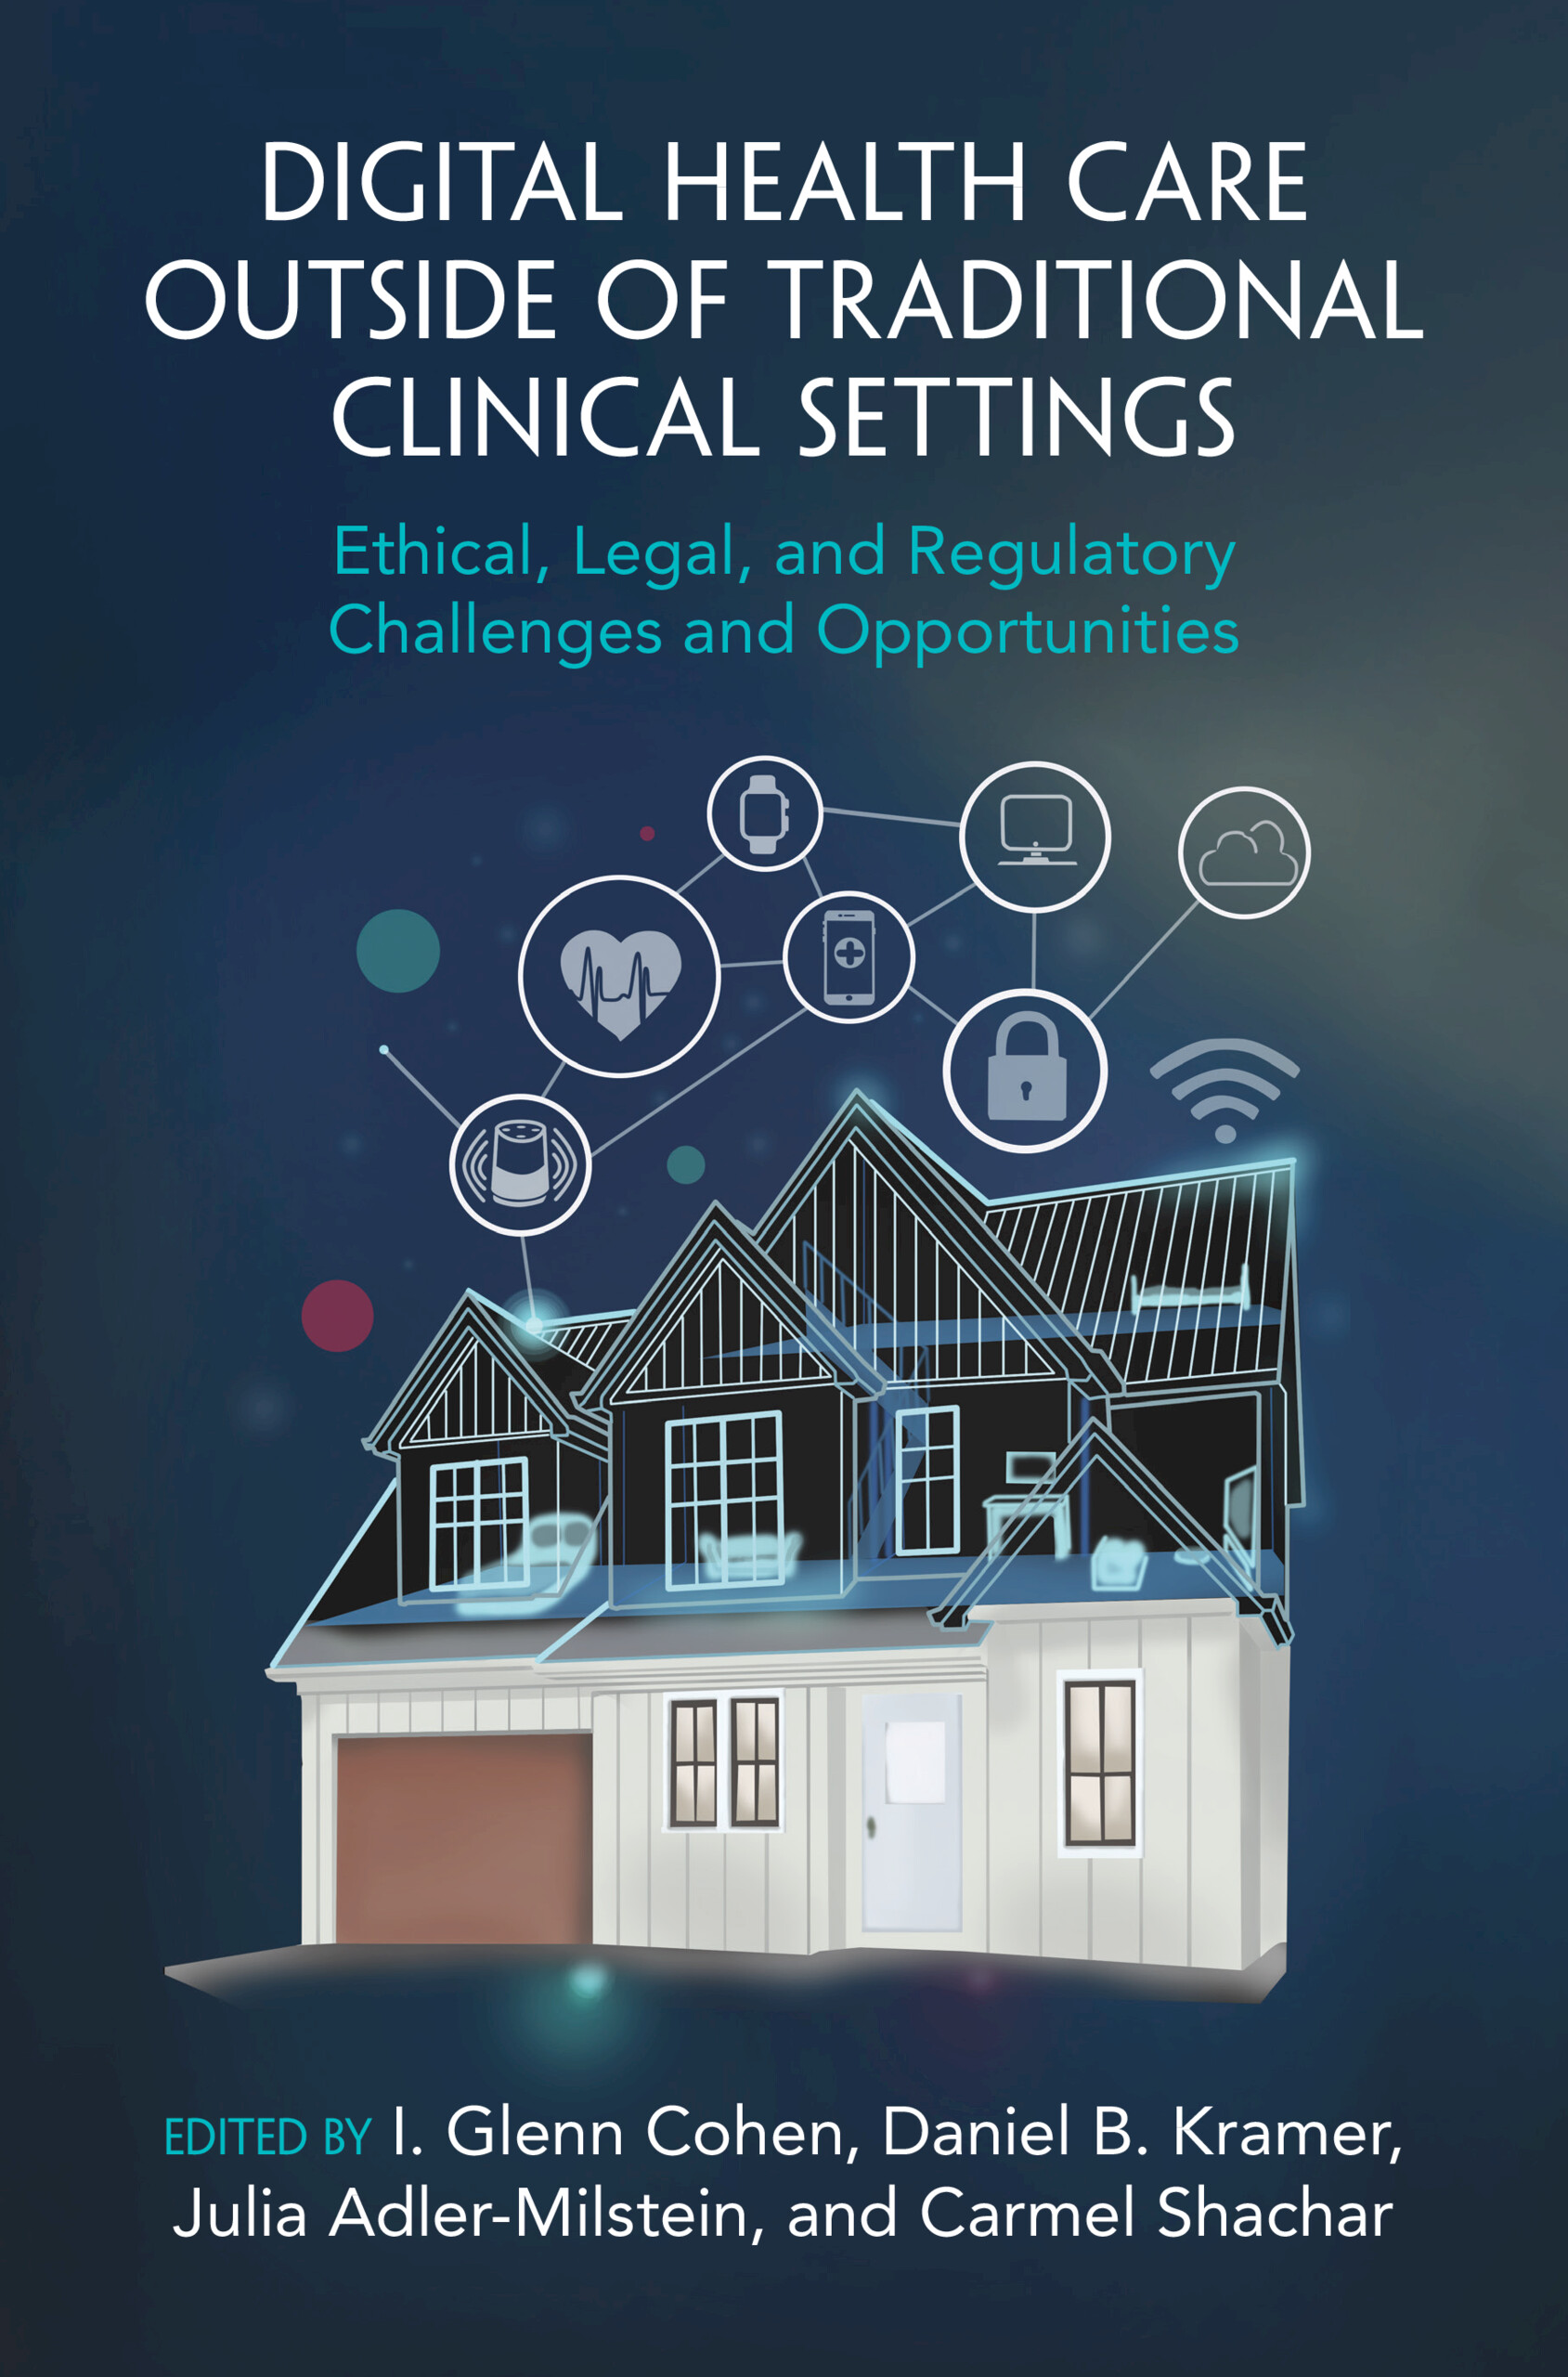 New volume published: “Digital Health Care Outside of Traditional Clinical Settings: Ethical, Legal, and Regulatory Challenges and Opportunities”